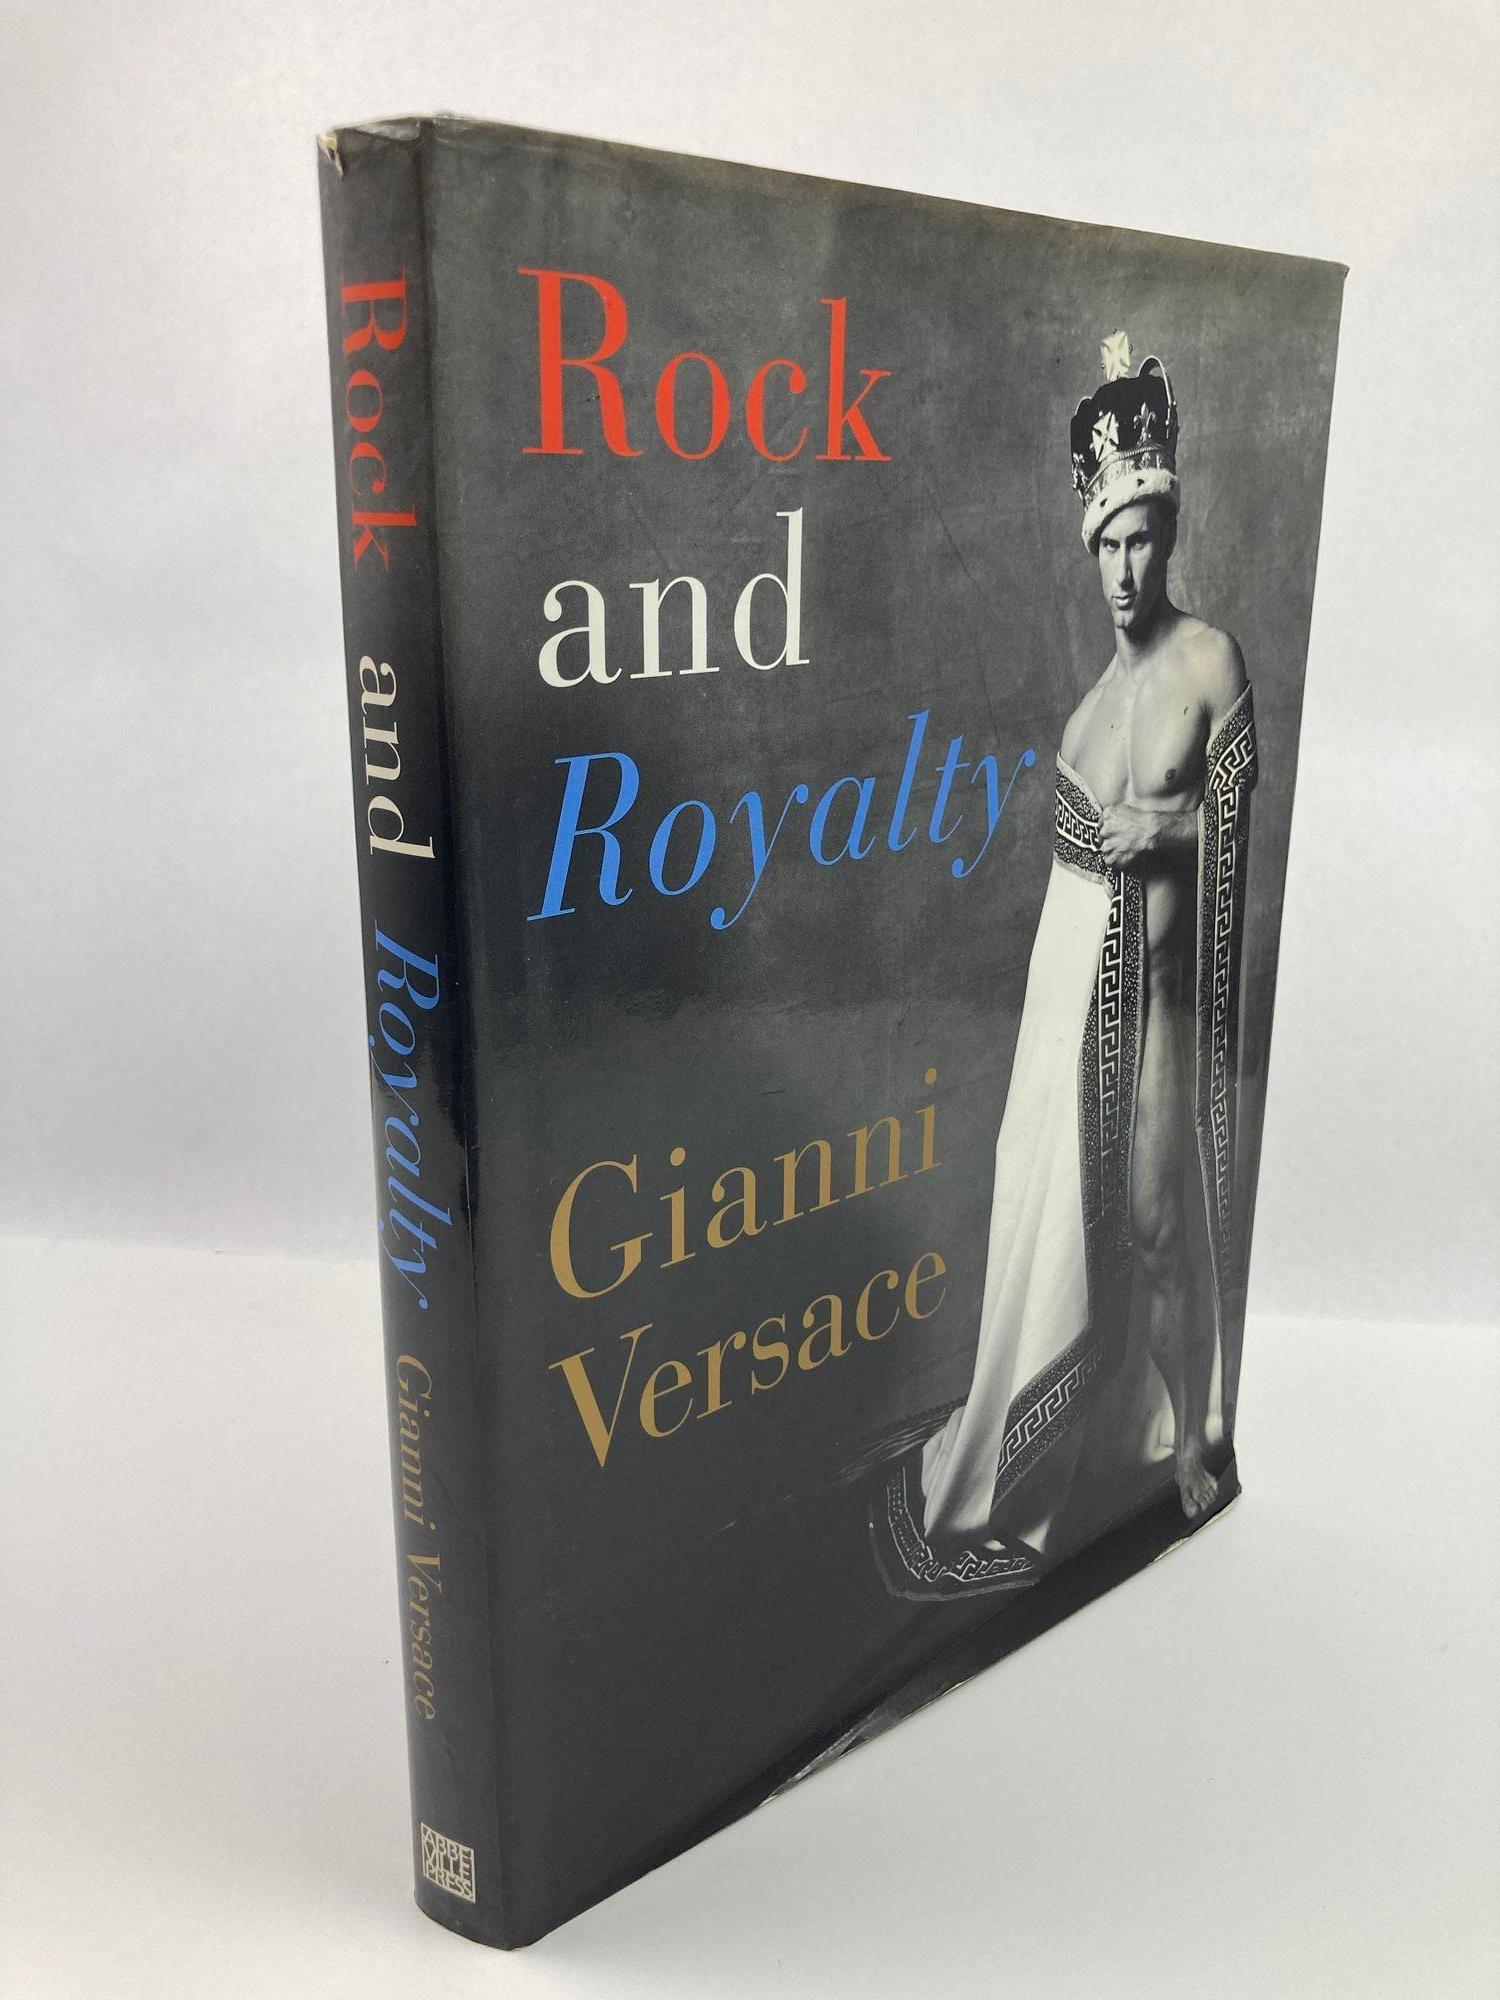 Rock and Royalty Gianni Versace Hardcover Large Coffee Table Book.
Abbeville Press, 1999 - Celebrities - 288 pages English.
Fashion's late king here offers a parade of couture featuring the luminaries of rock, royalty, and sport. 
A galaxy of stars,